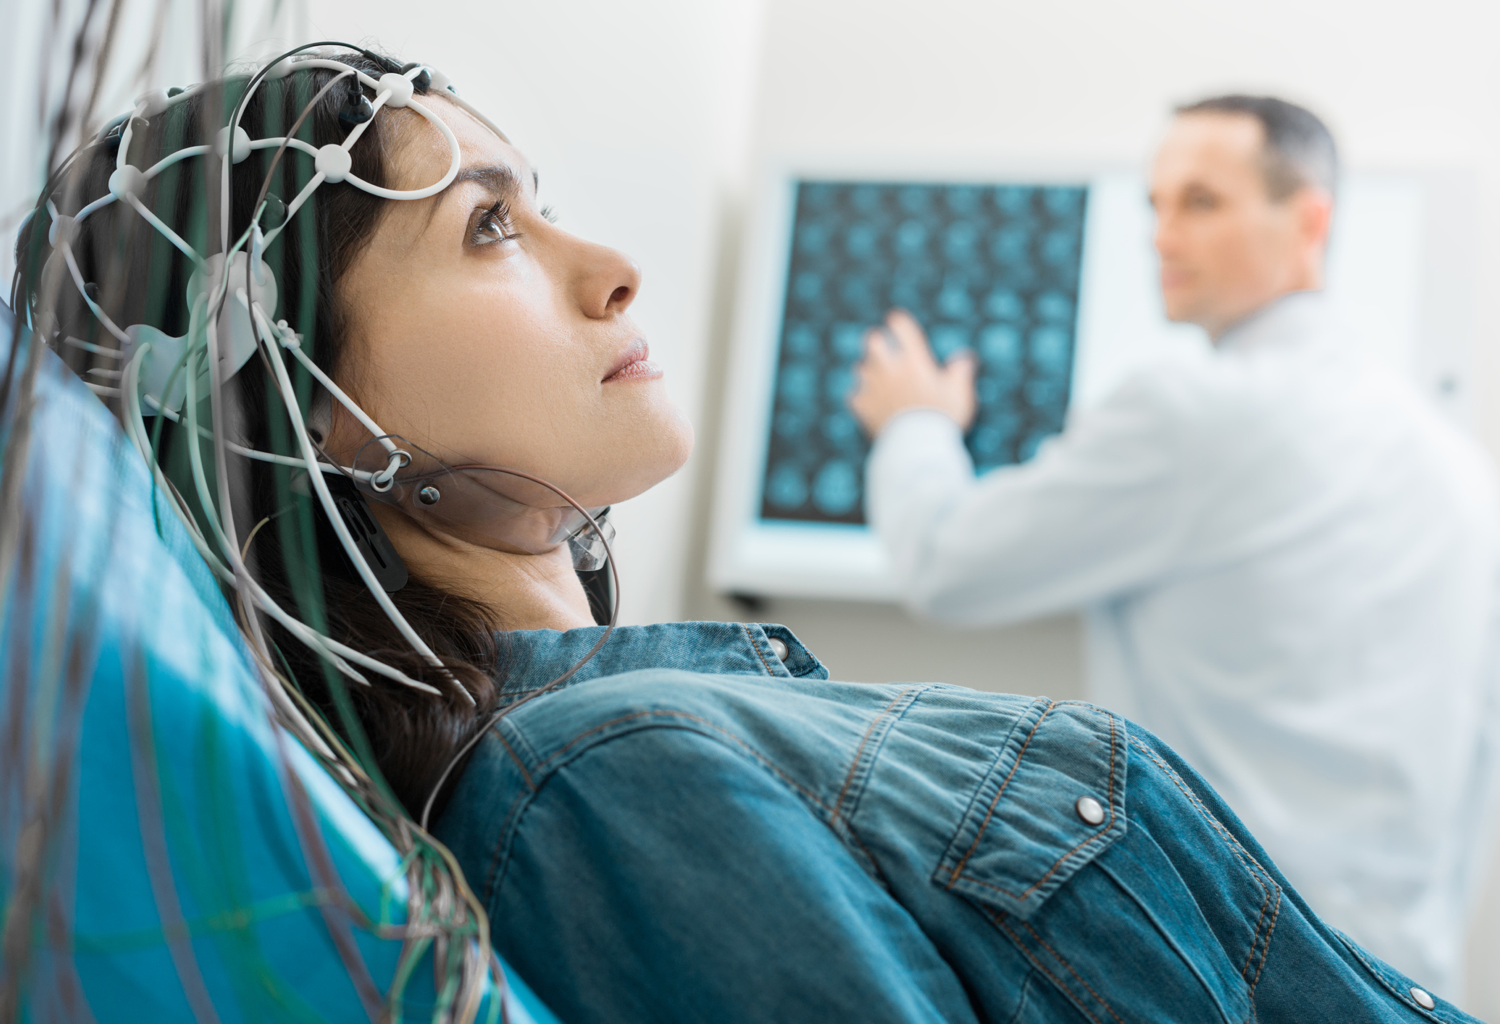 What Is Electrical Stimulation